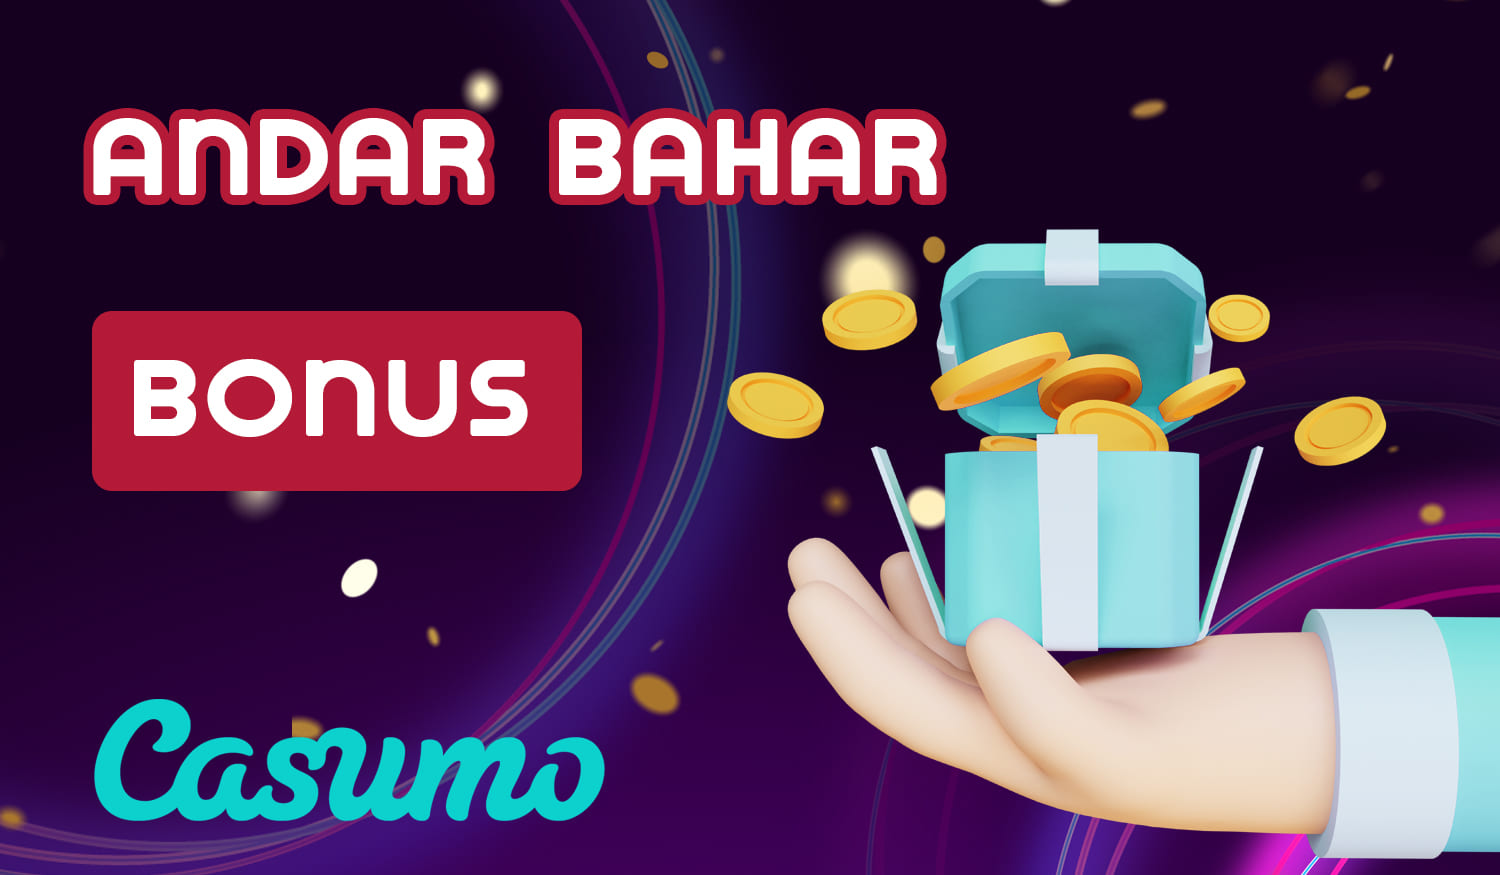 How Indian users can get a welcome bonus on Casumo site